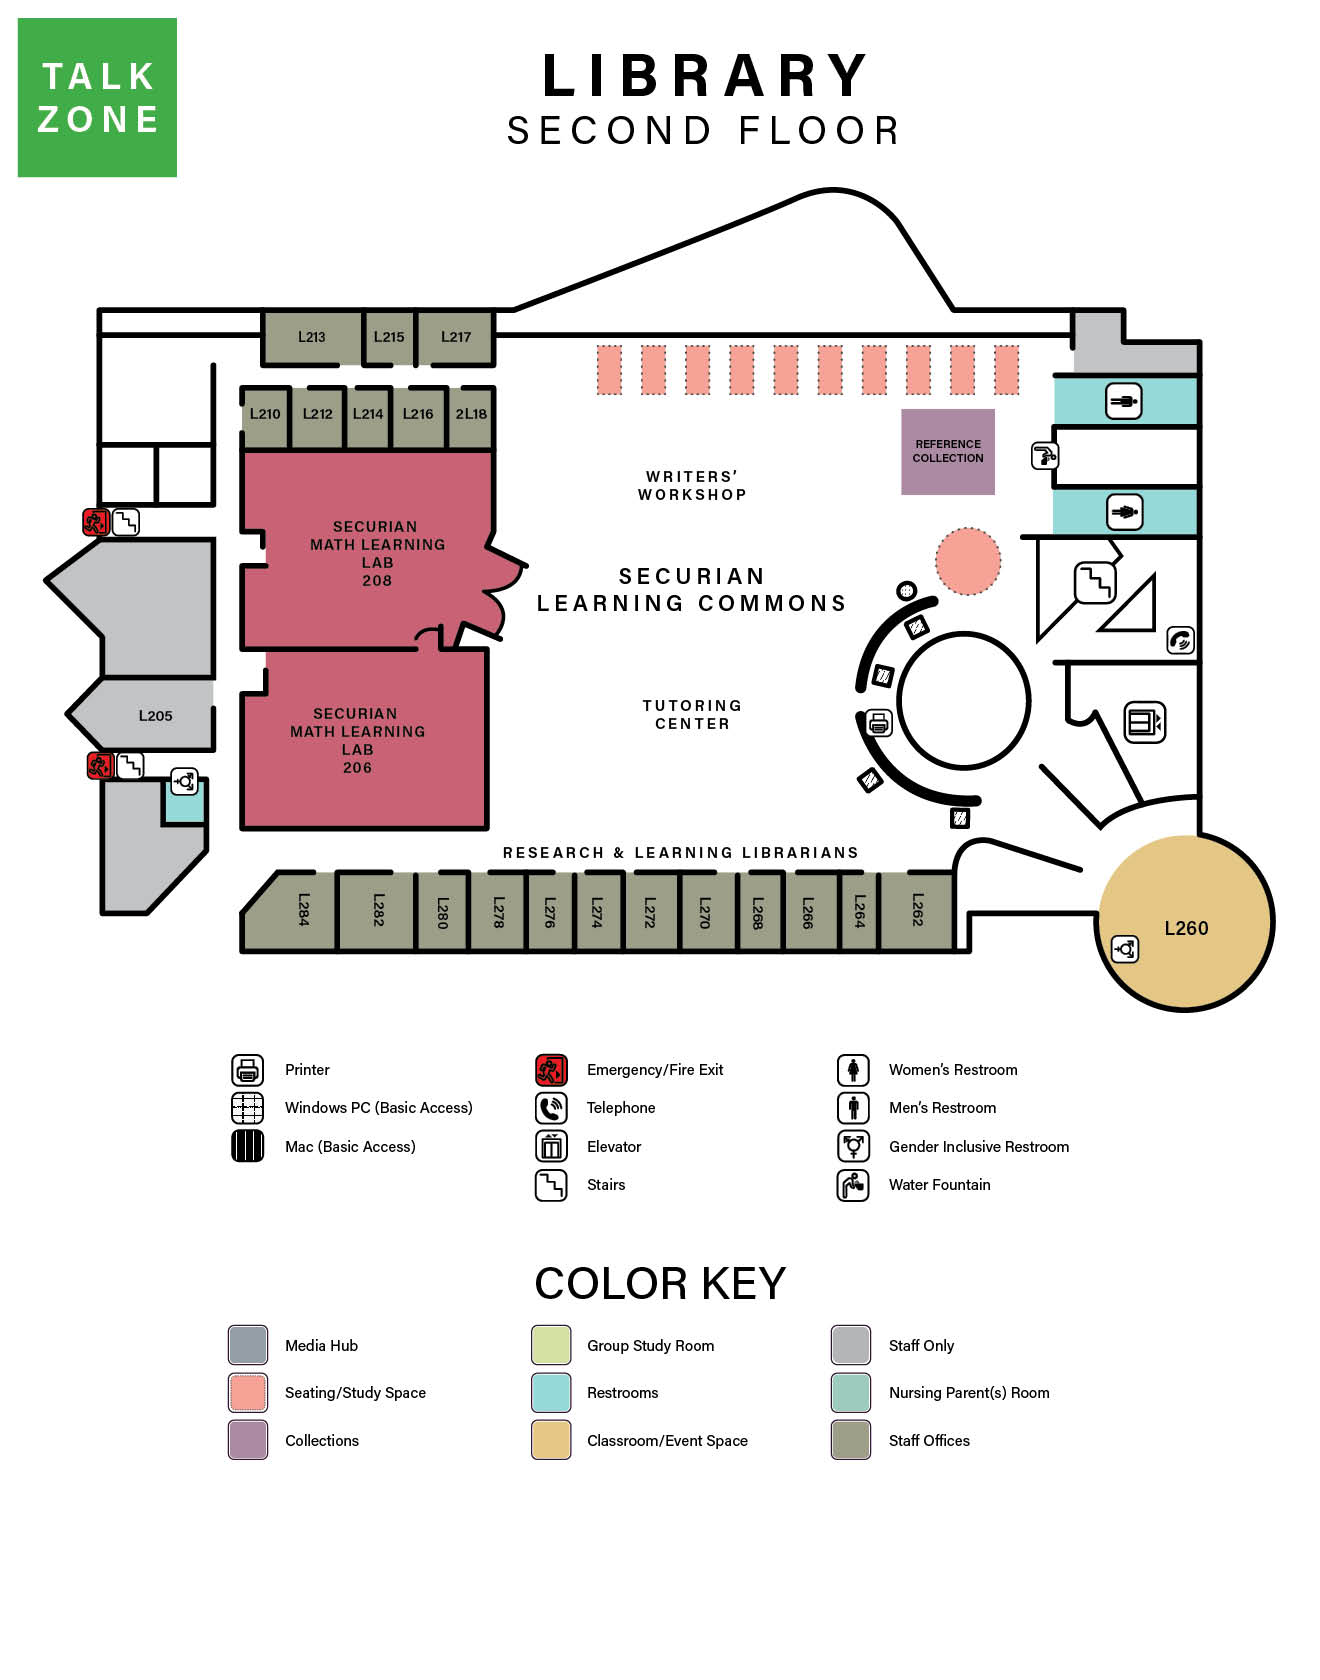 a floor map of of the library second floor, which shows room numbers, and space names, and also includes information such as stairwell access, emergency exits, bathrooms, etc.